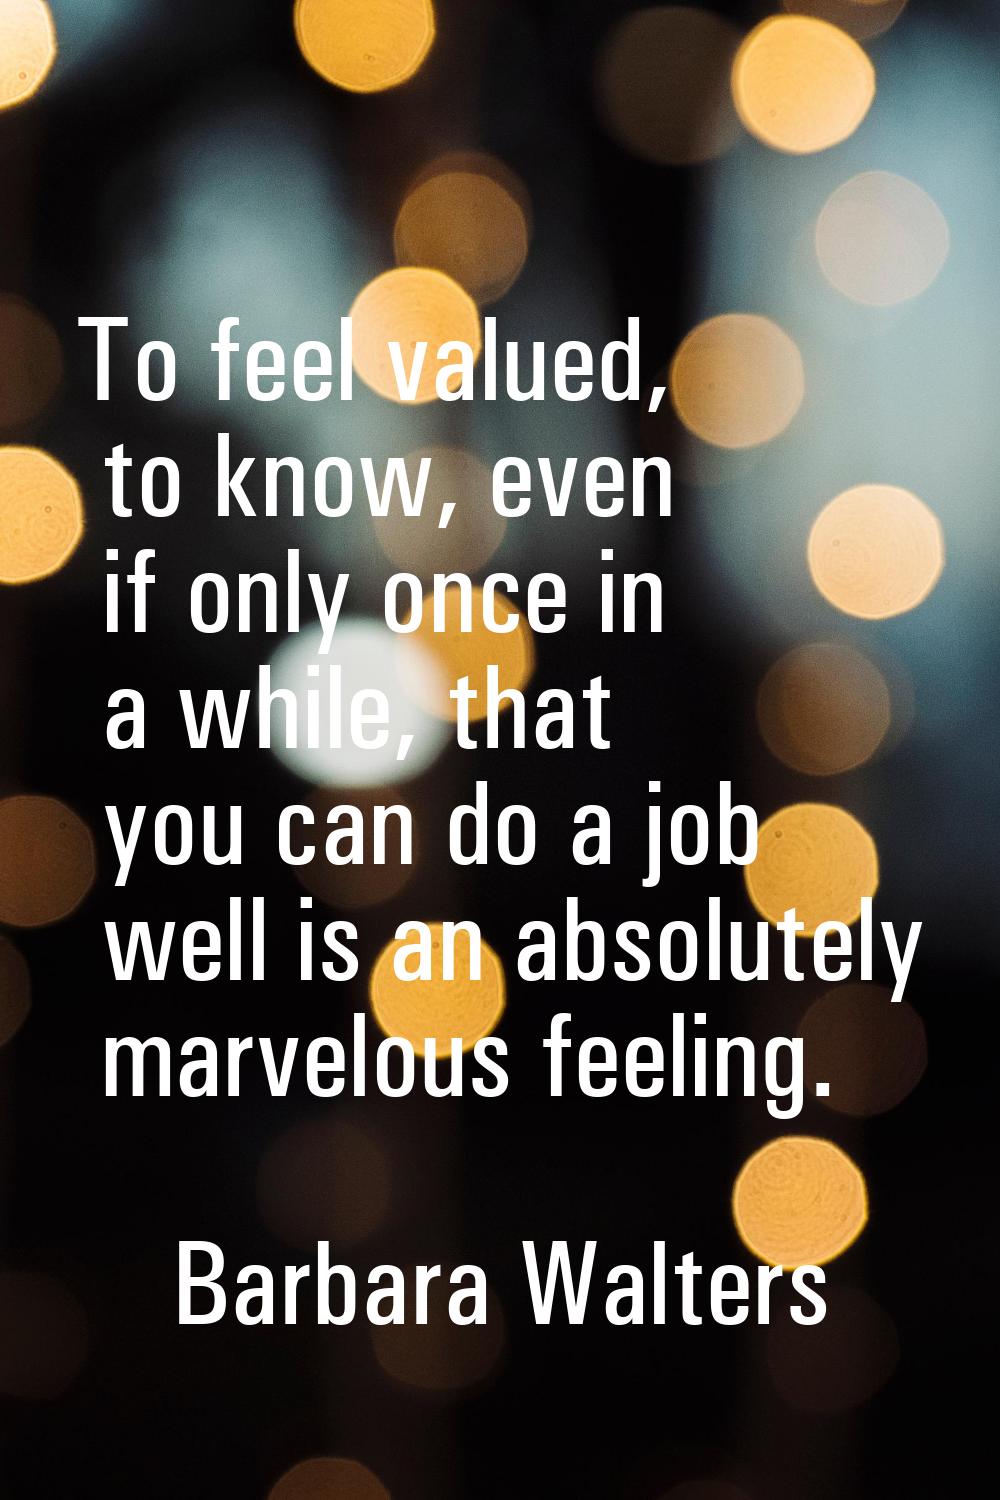 To feel valued, to know, even if only once in a while, that you can do a job well is an absolutely 